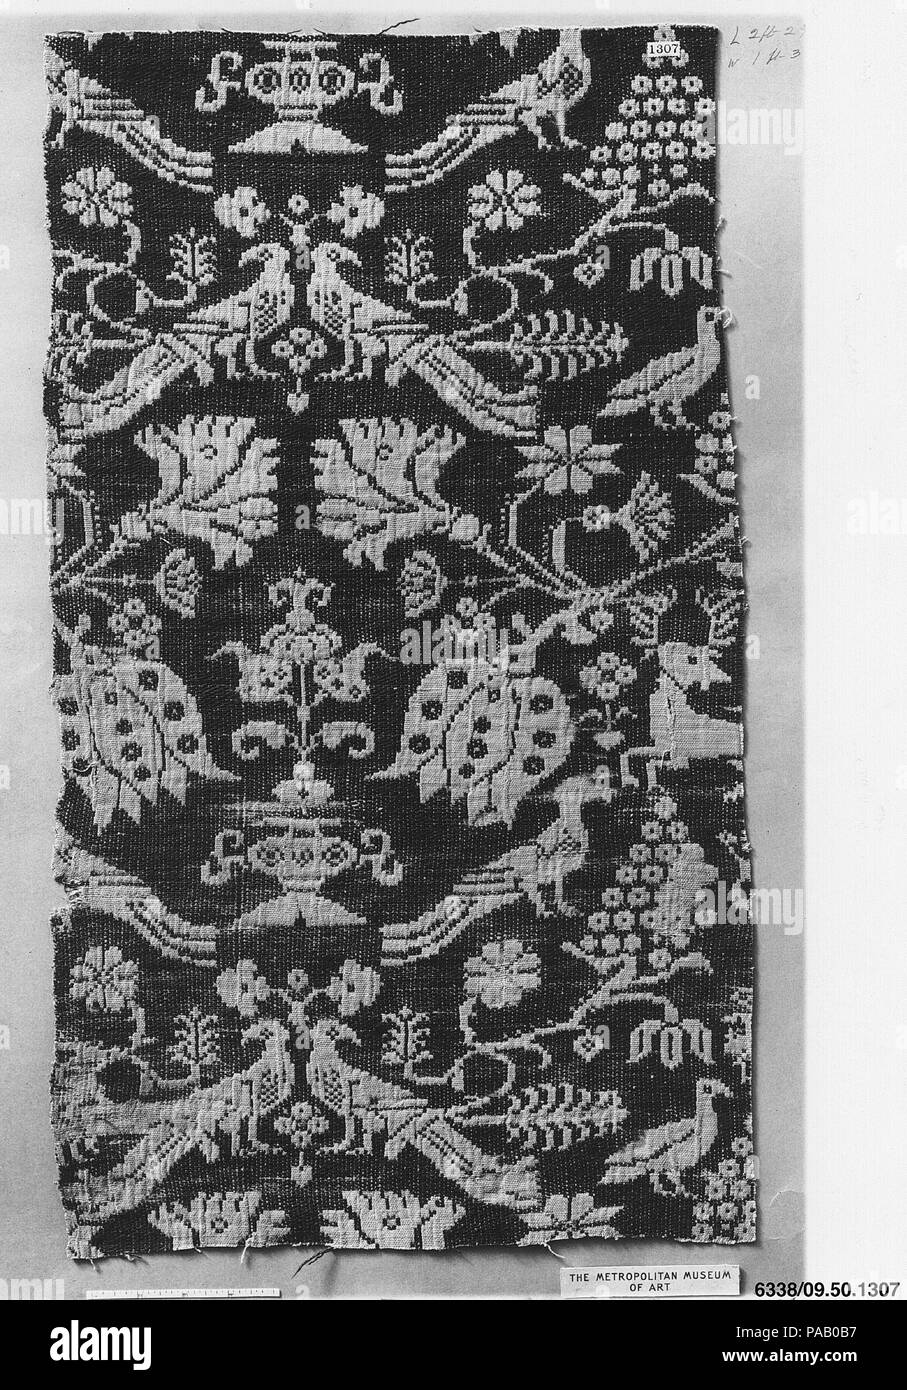 Piece. Culture: German, Schleswig-Holstein. Dimensions: Overall: 26 3/4 x 15 in. (67.9 x 38.1 cm). Date: 18th century.  Silk textiles composed of paired animals nestled in dense foliage were woven in Europe before 1400 and were probably inspired by precious Central Asian textiles. These two double cloths [34.41.7 and 09.50.1037] illustrate how the tradition continued, and their graphic quality mirrors that of  Brother Rabbit. Museum: Metropolitan Museum of Art, New York, USA. Stock Photo